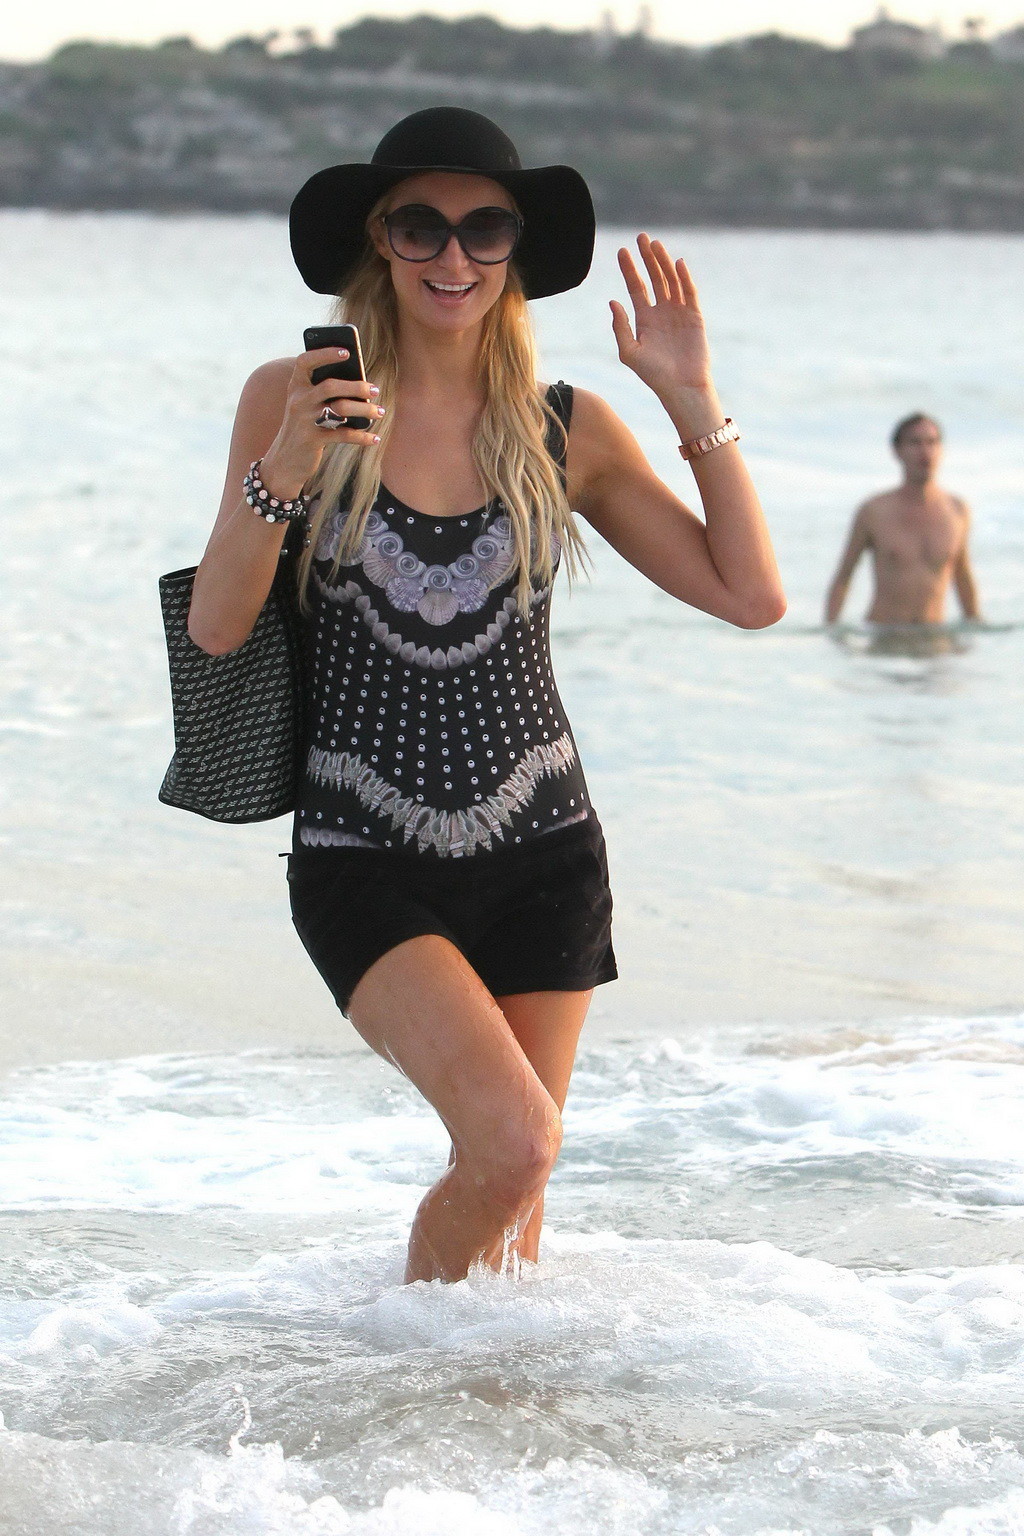 Paris Hilton showing her beautiful body in shorts and top at Bondi Beach in Sydn #75267774